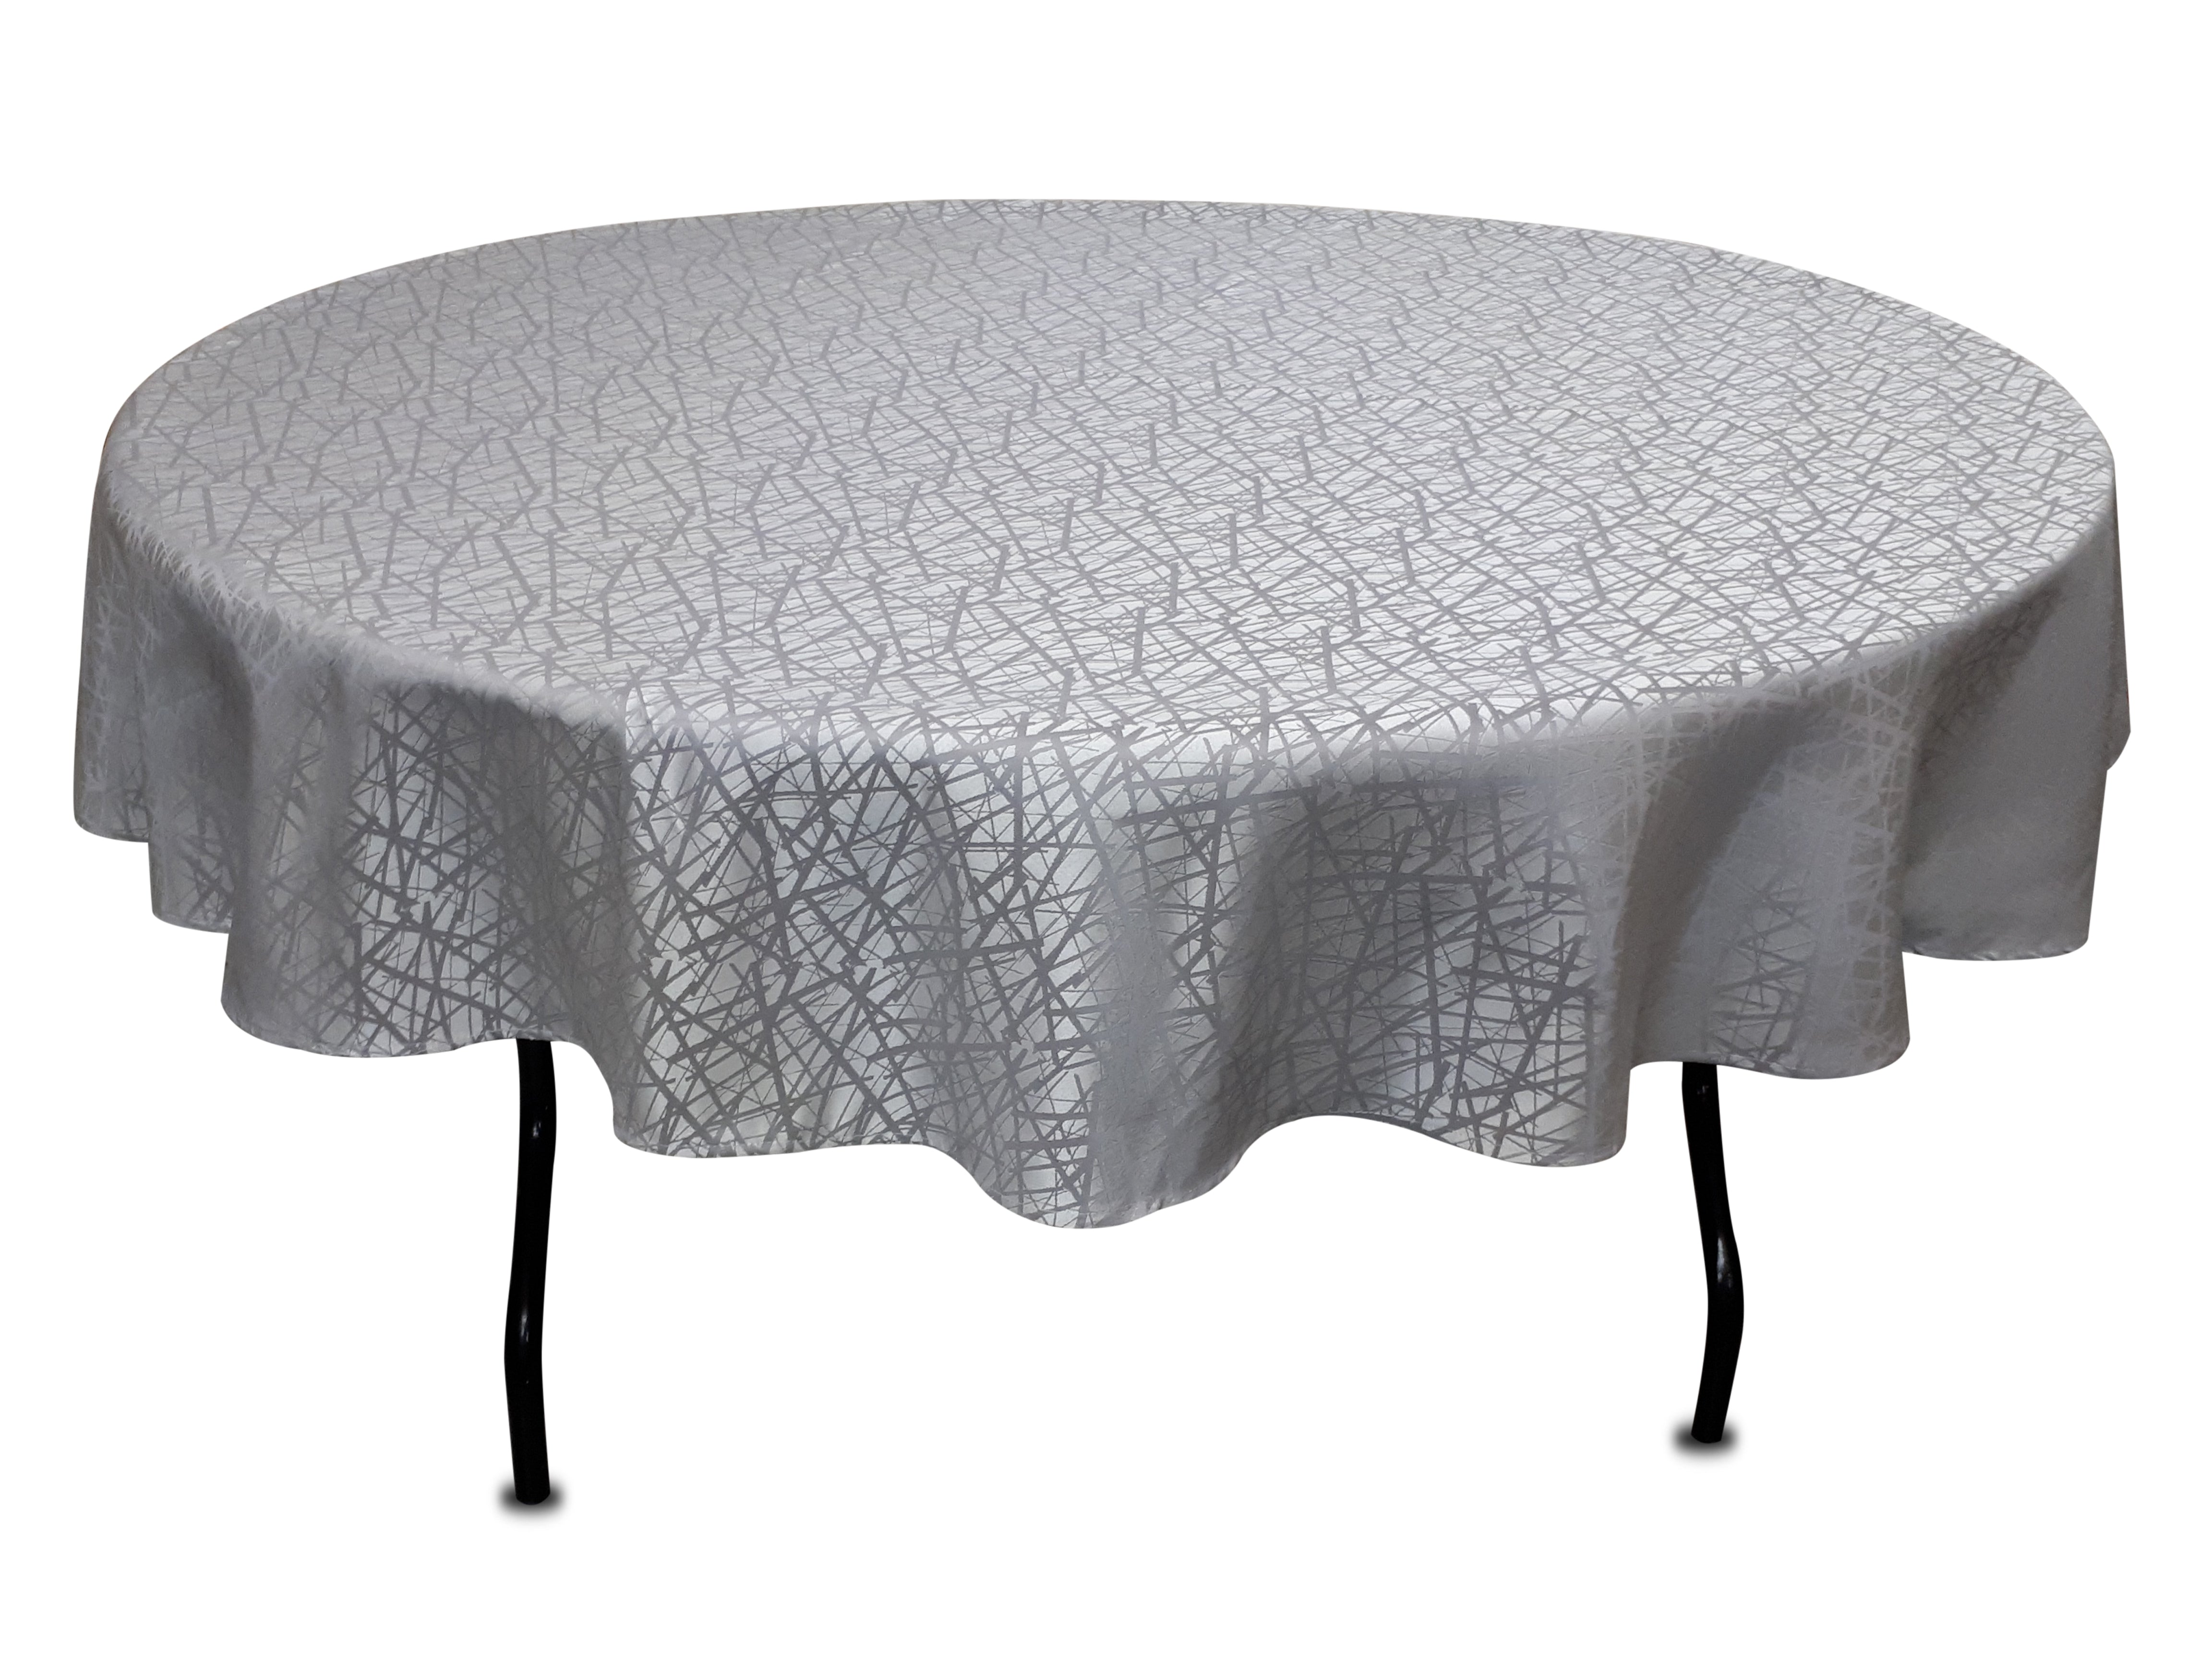 80 round tablecloth with umbrella hole